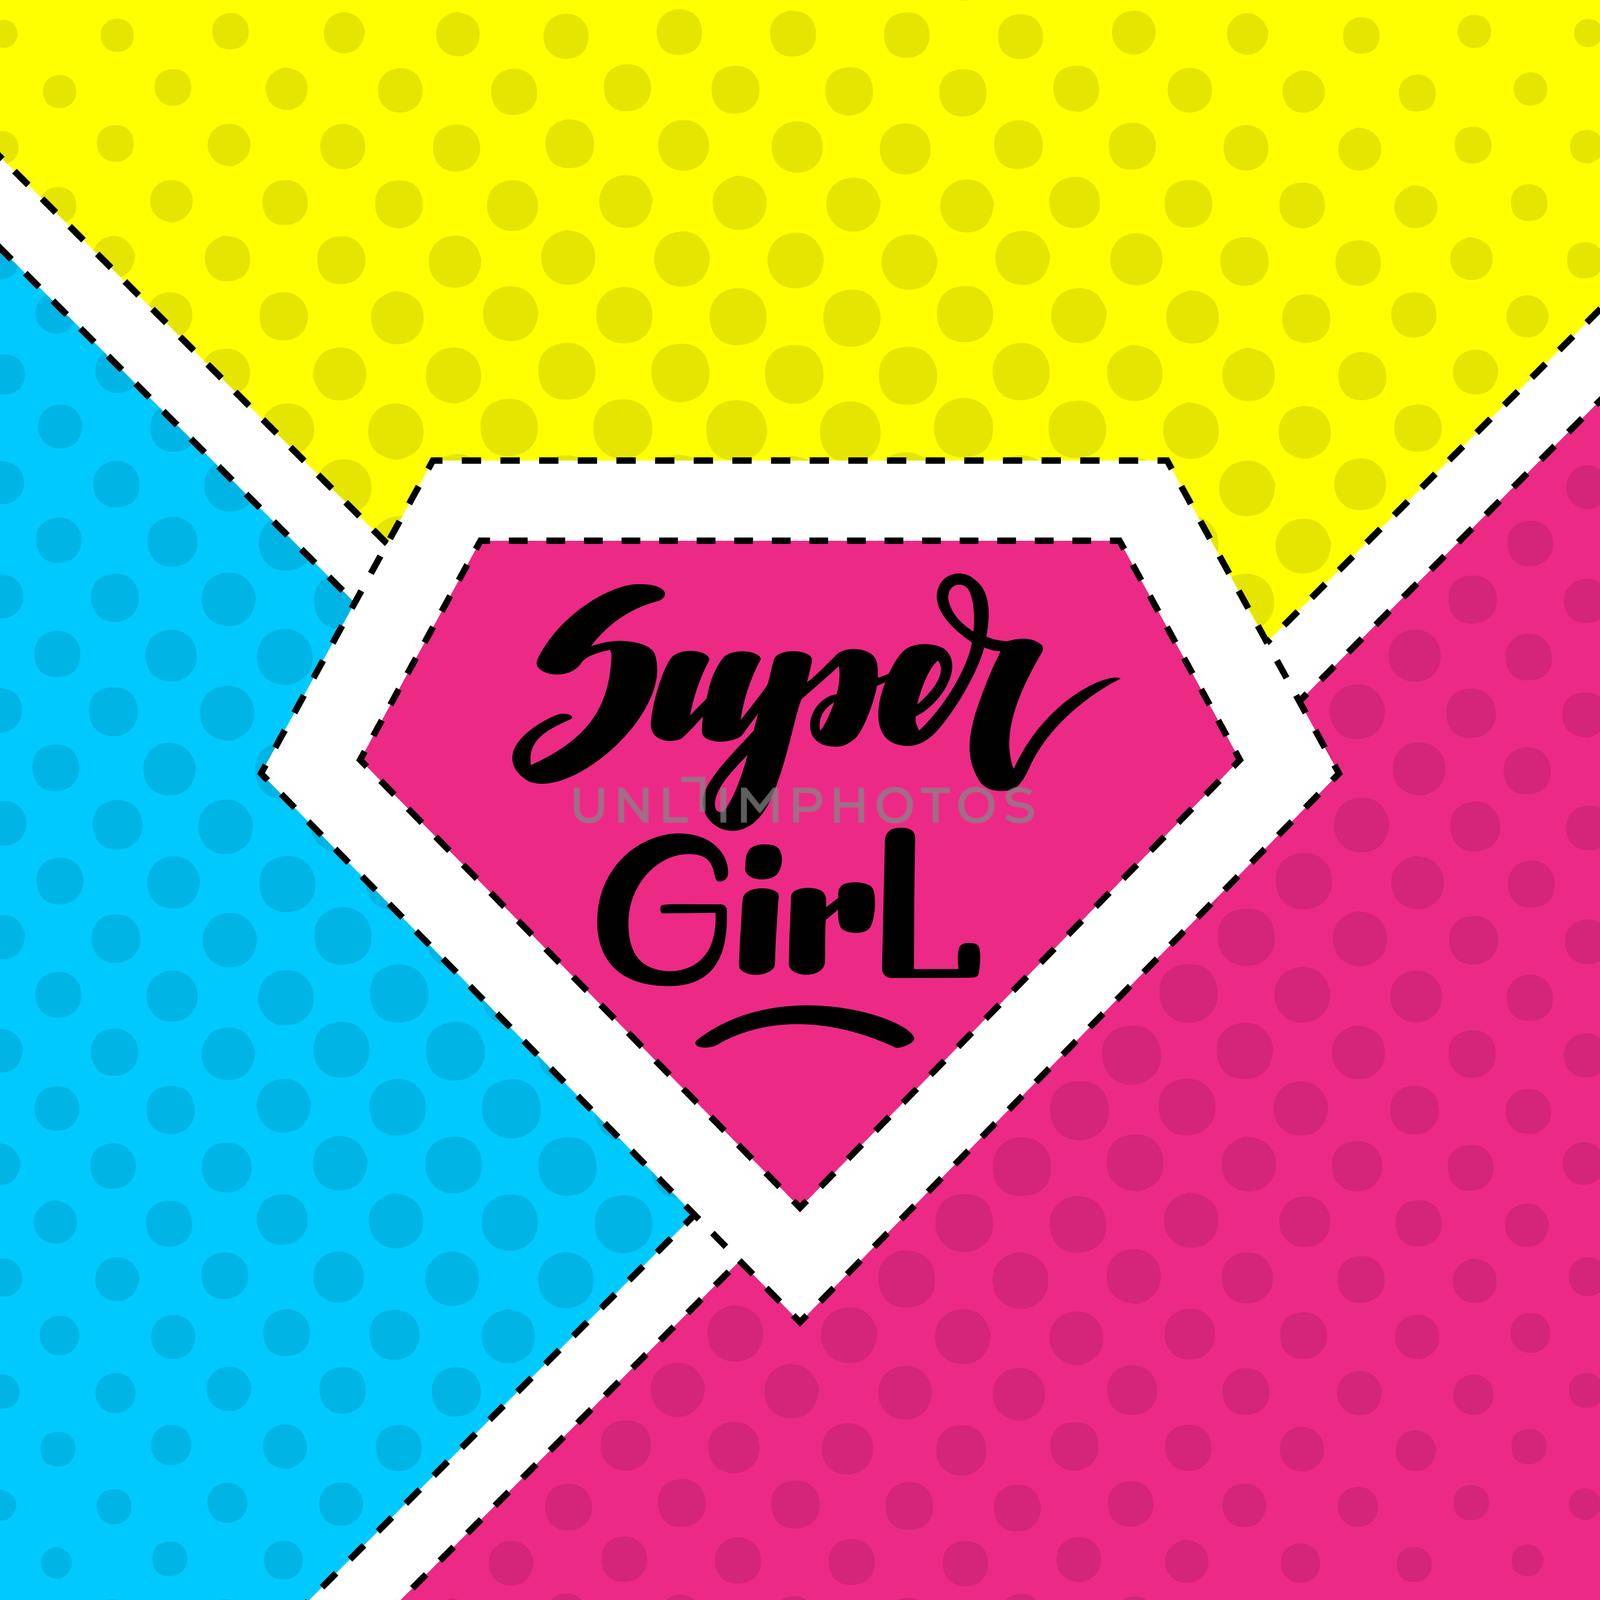 Super girl. Handwritten lettering on colorful background with halftone texture. illustration for posters, cards and much more by Marin4ik